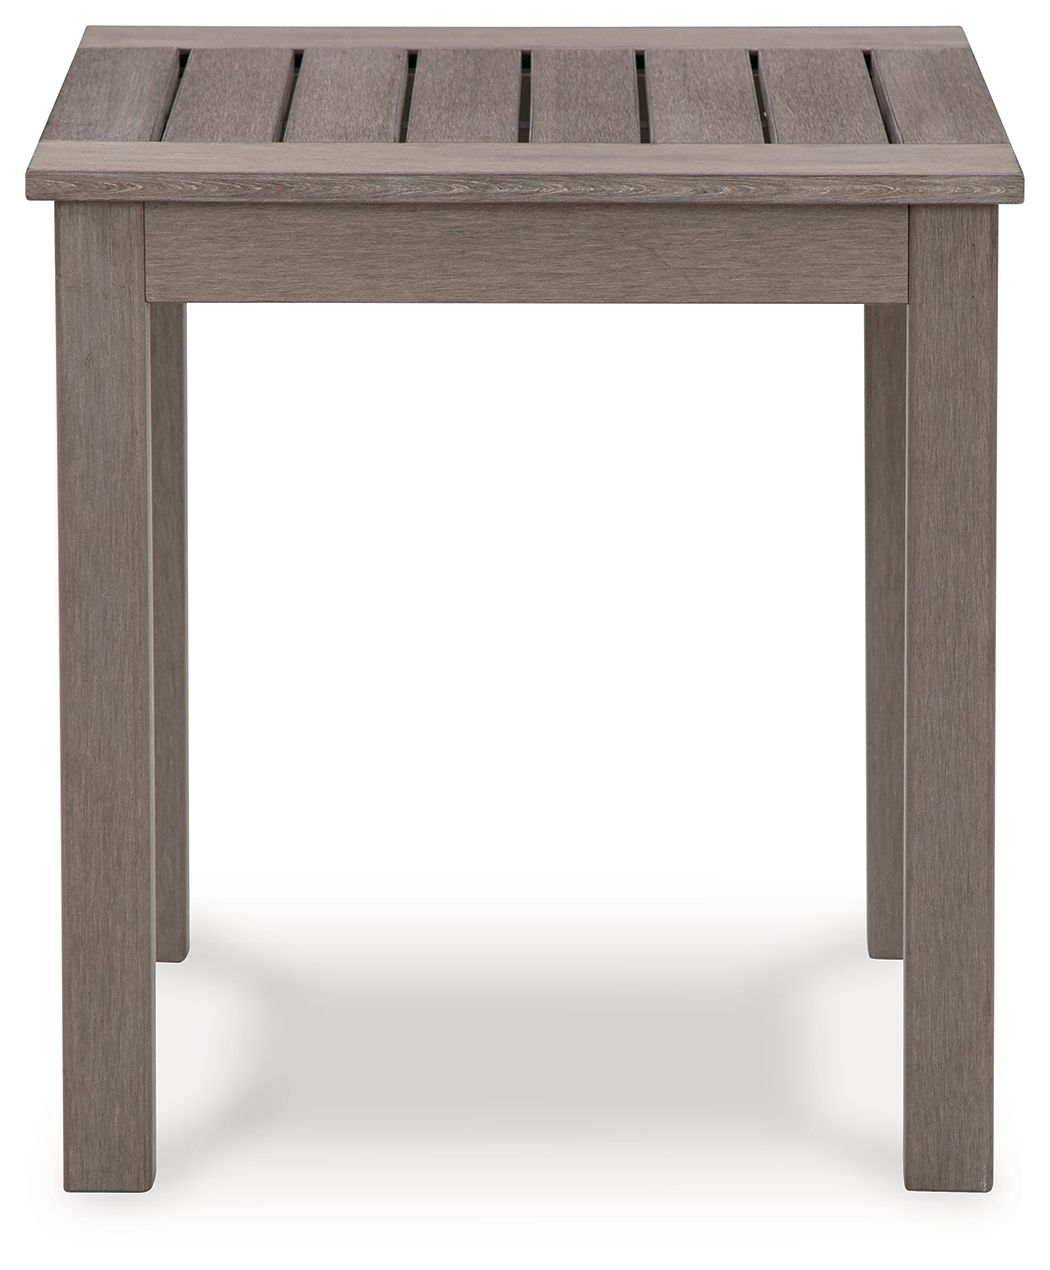 Hillside Barn - Brown - Square End Table - Tony's Home Furnishings